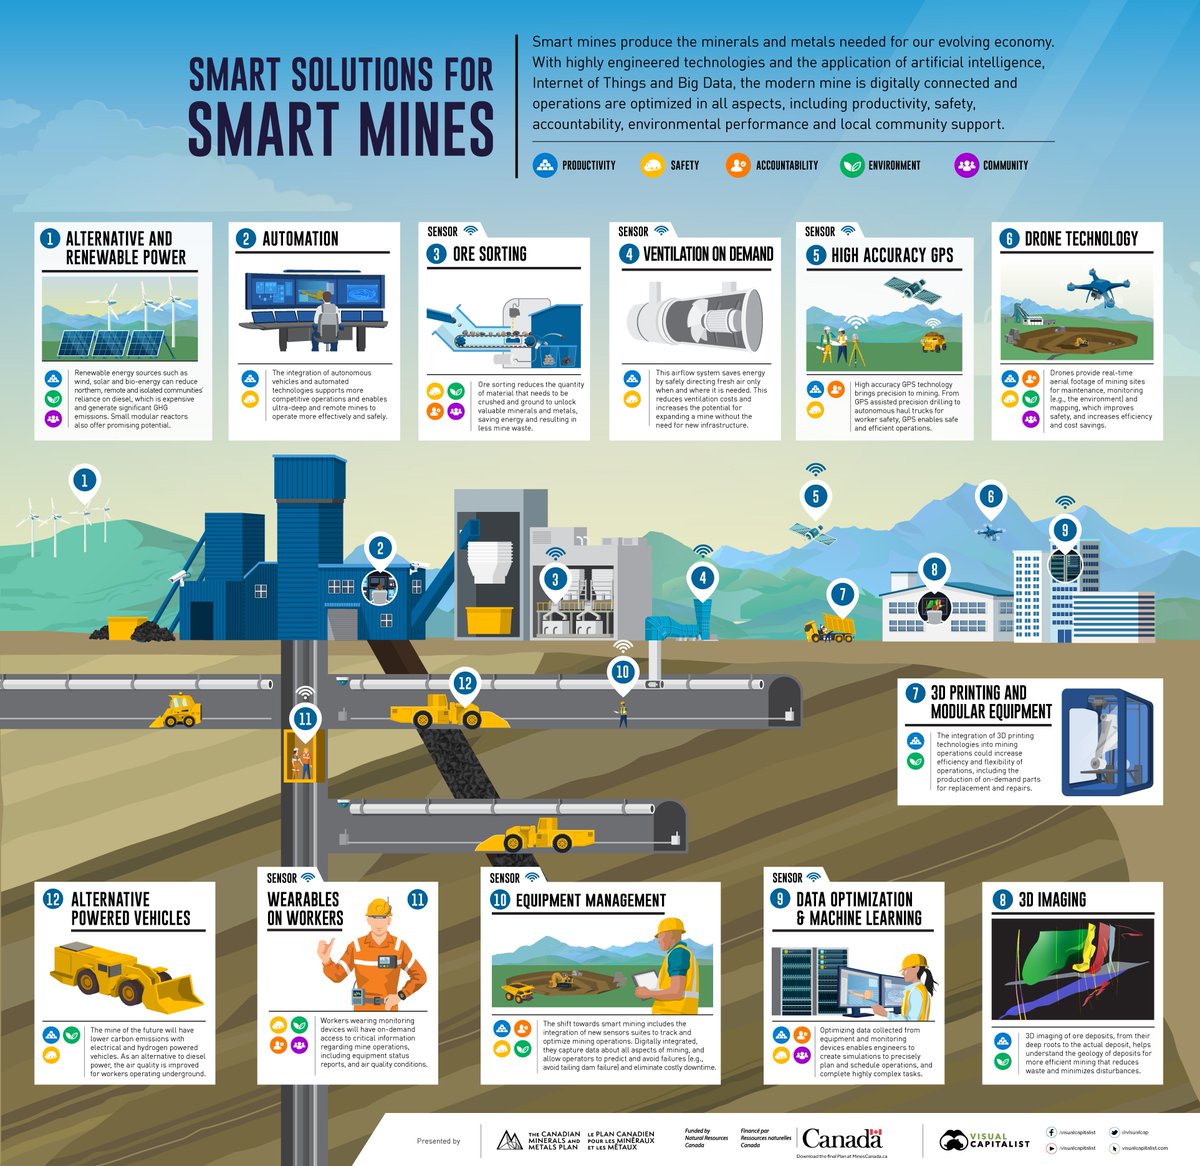 Today’s #mining industry is high-tech, efficient, and safe. #Ontario is leading the way - putting smart solutions and #STEM into practice. Read more about it here: bit.ly/2Giic40 #thisismining #smartmining